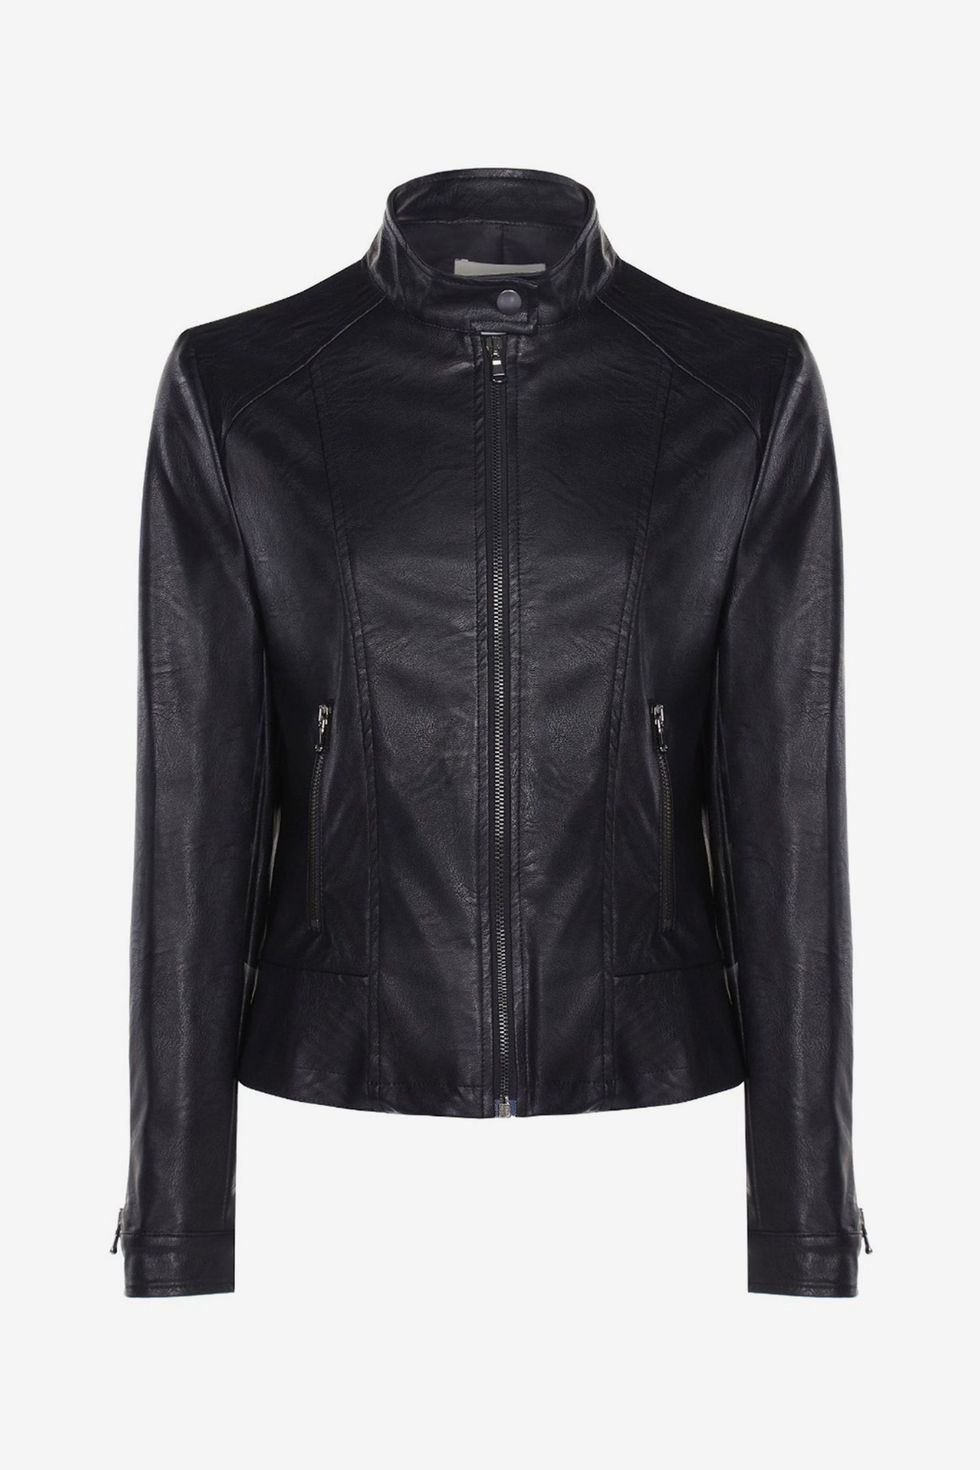 Vegan Leather & Suede Jackets – Will's Vegan Store